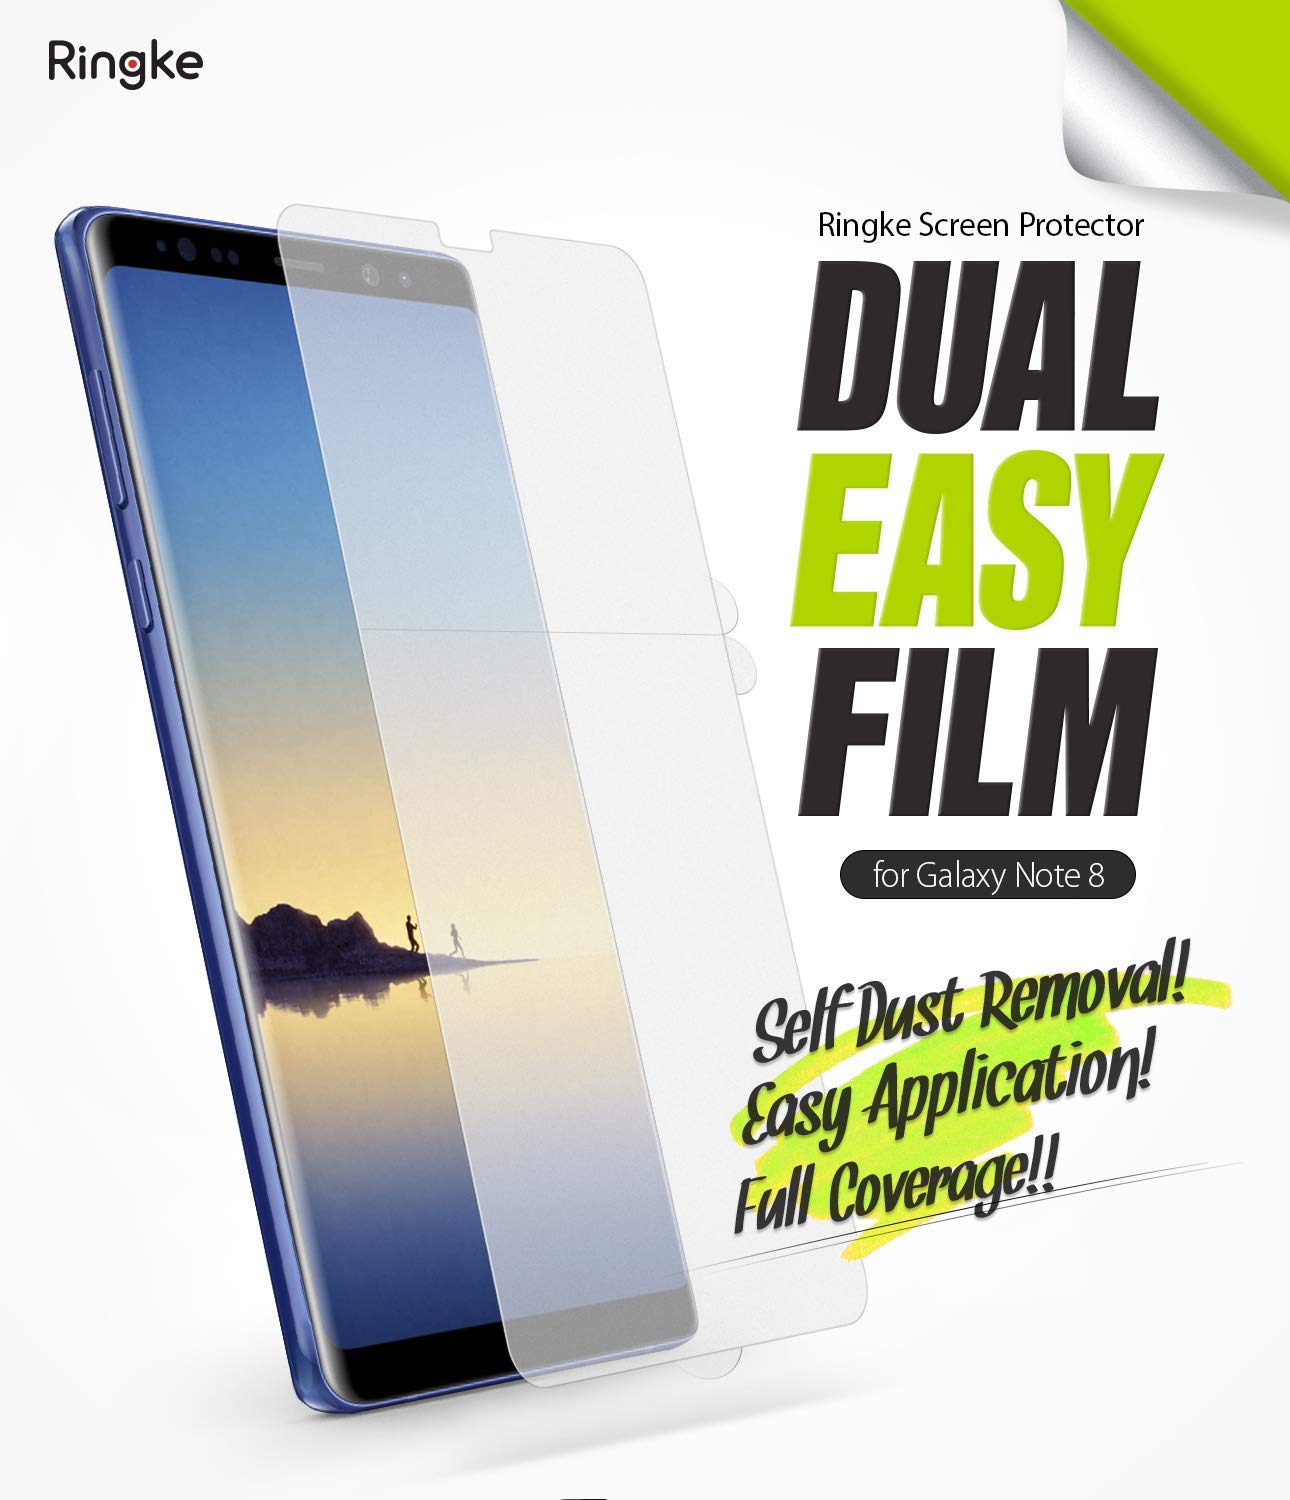 galaxy note 8 dual easy full cover screen protector 2 pack